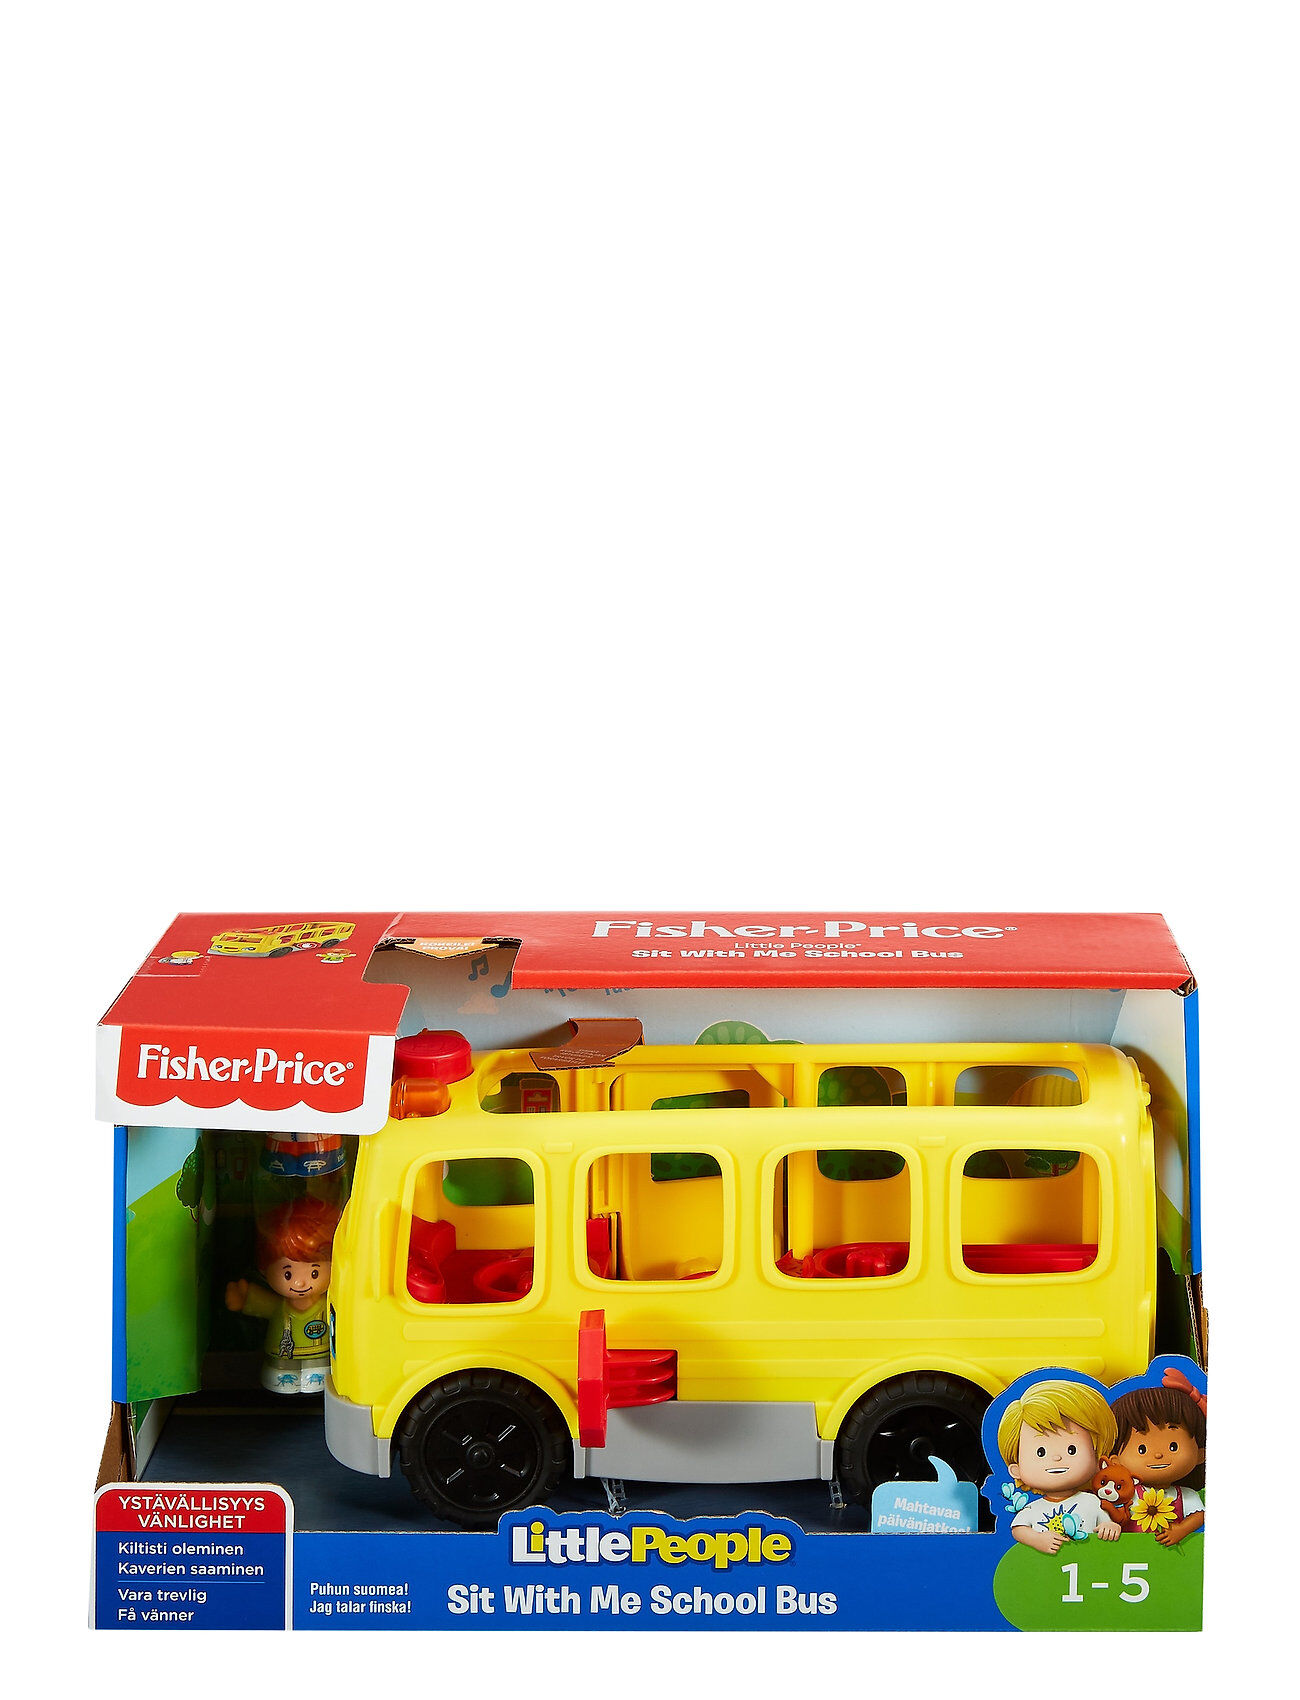 Fisher-Price People Sit With Me School Bus - Fi Toys Toy Cars & Vehicles Toy Vehicles Multi/mønstret Fisher-Price